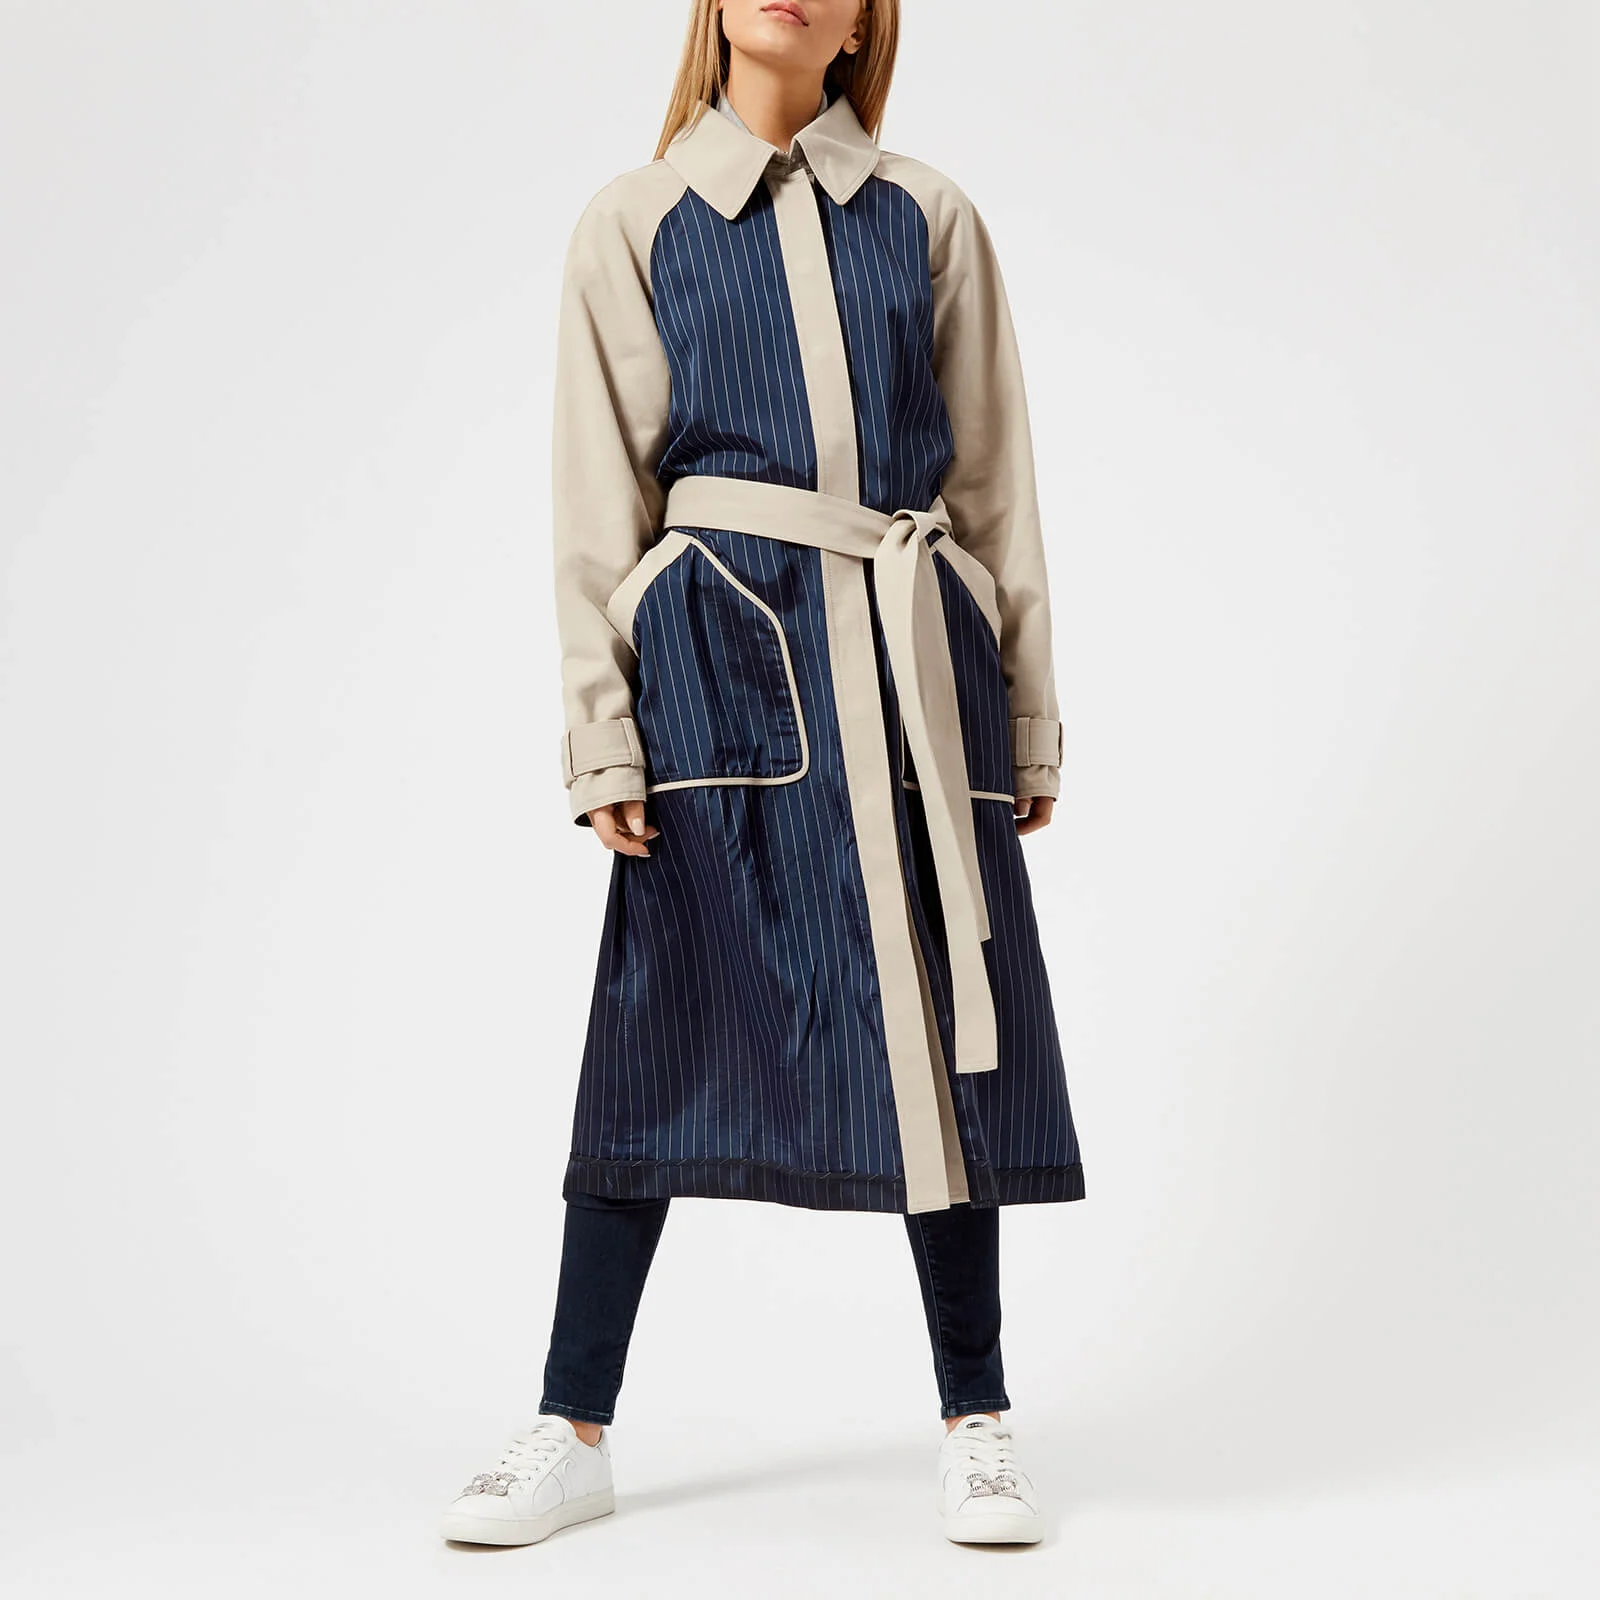 T by Alexander Wang Women's Chino Mixed Media Trench Coat - Canvas/Stripe Combo Image 1